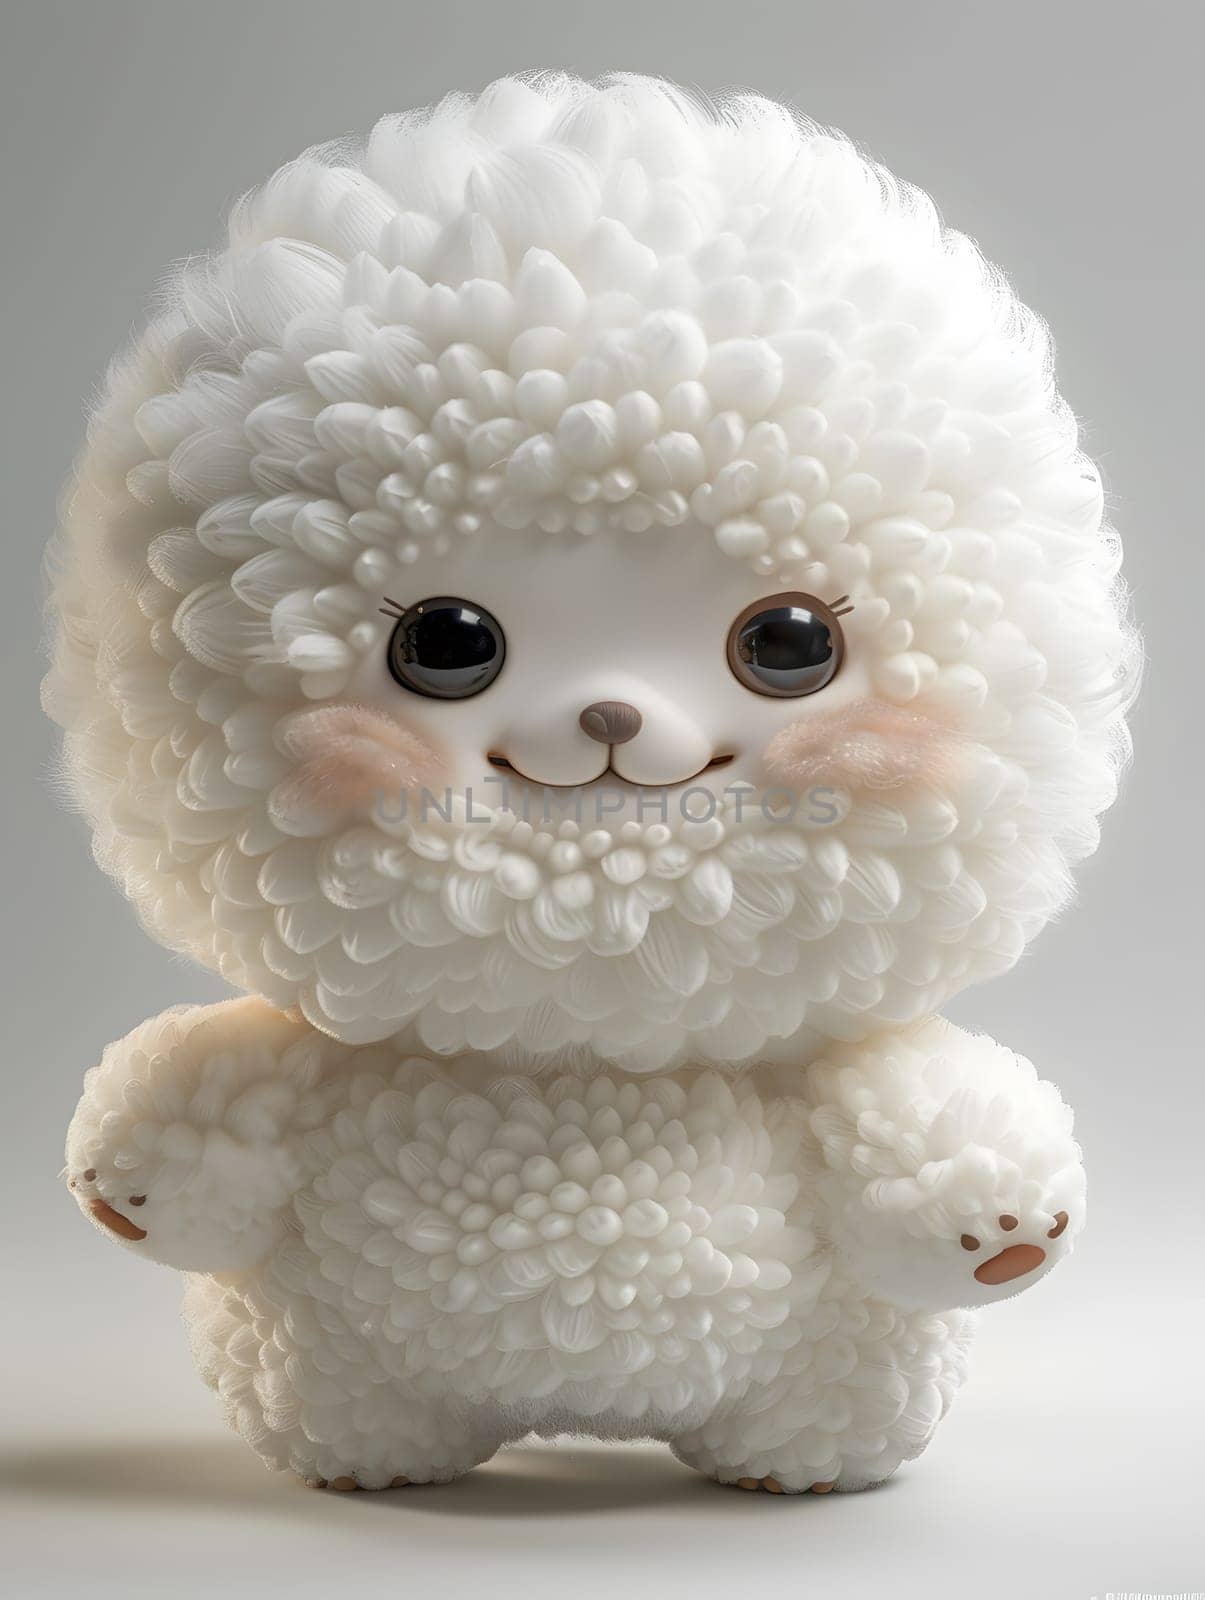 A fluffy stuffed toy dog with a big head sits on a white surface by Nadtochiy